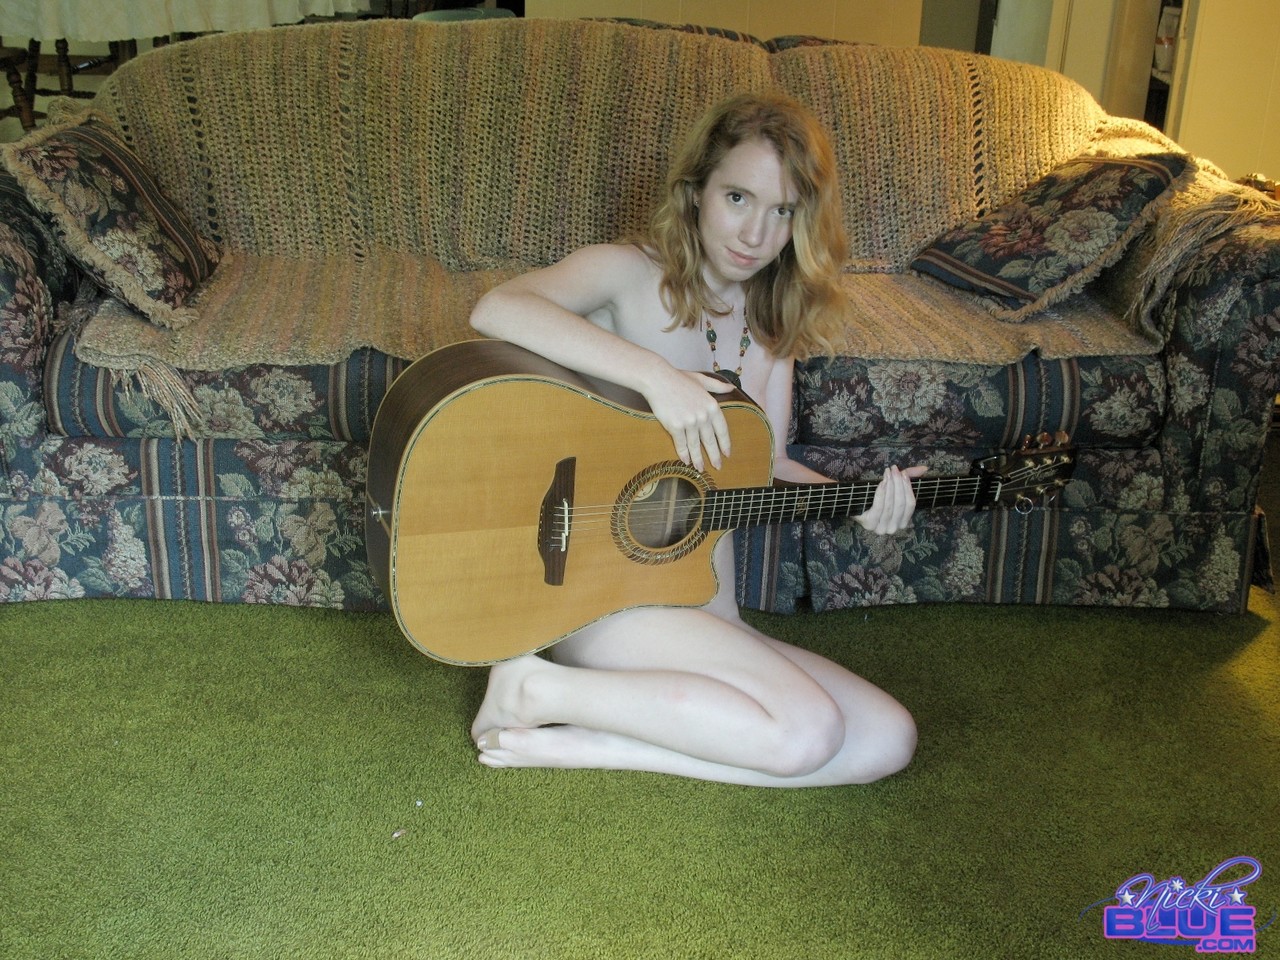 19-year-old babe Nicki Blue posing nude with a guitar in her hands porno fotky #424548935